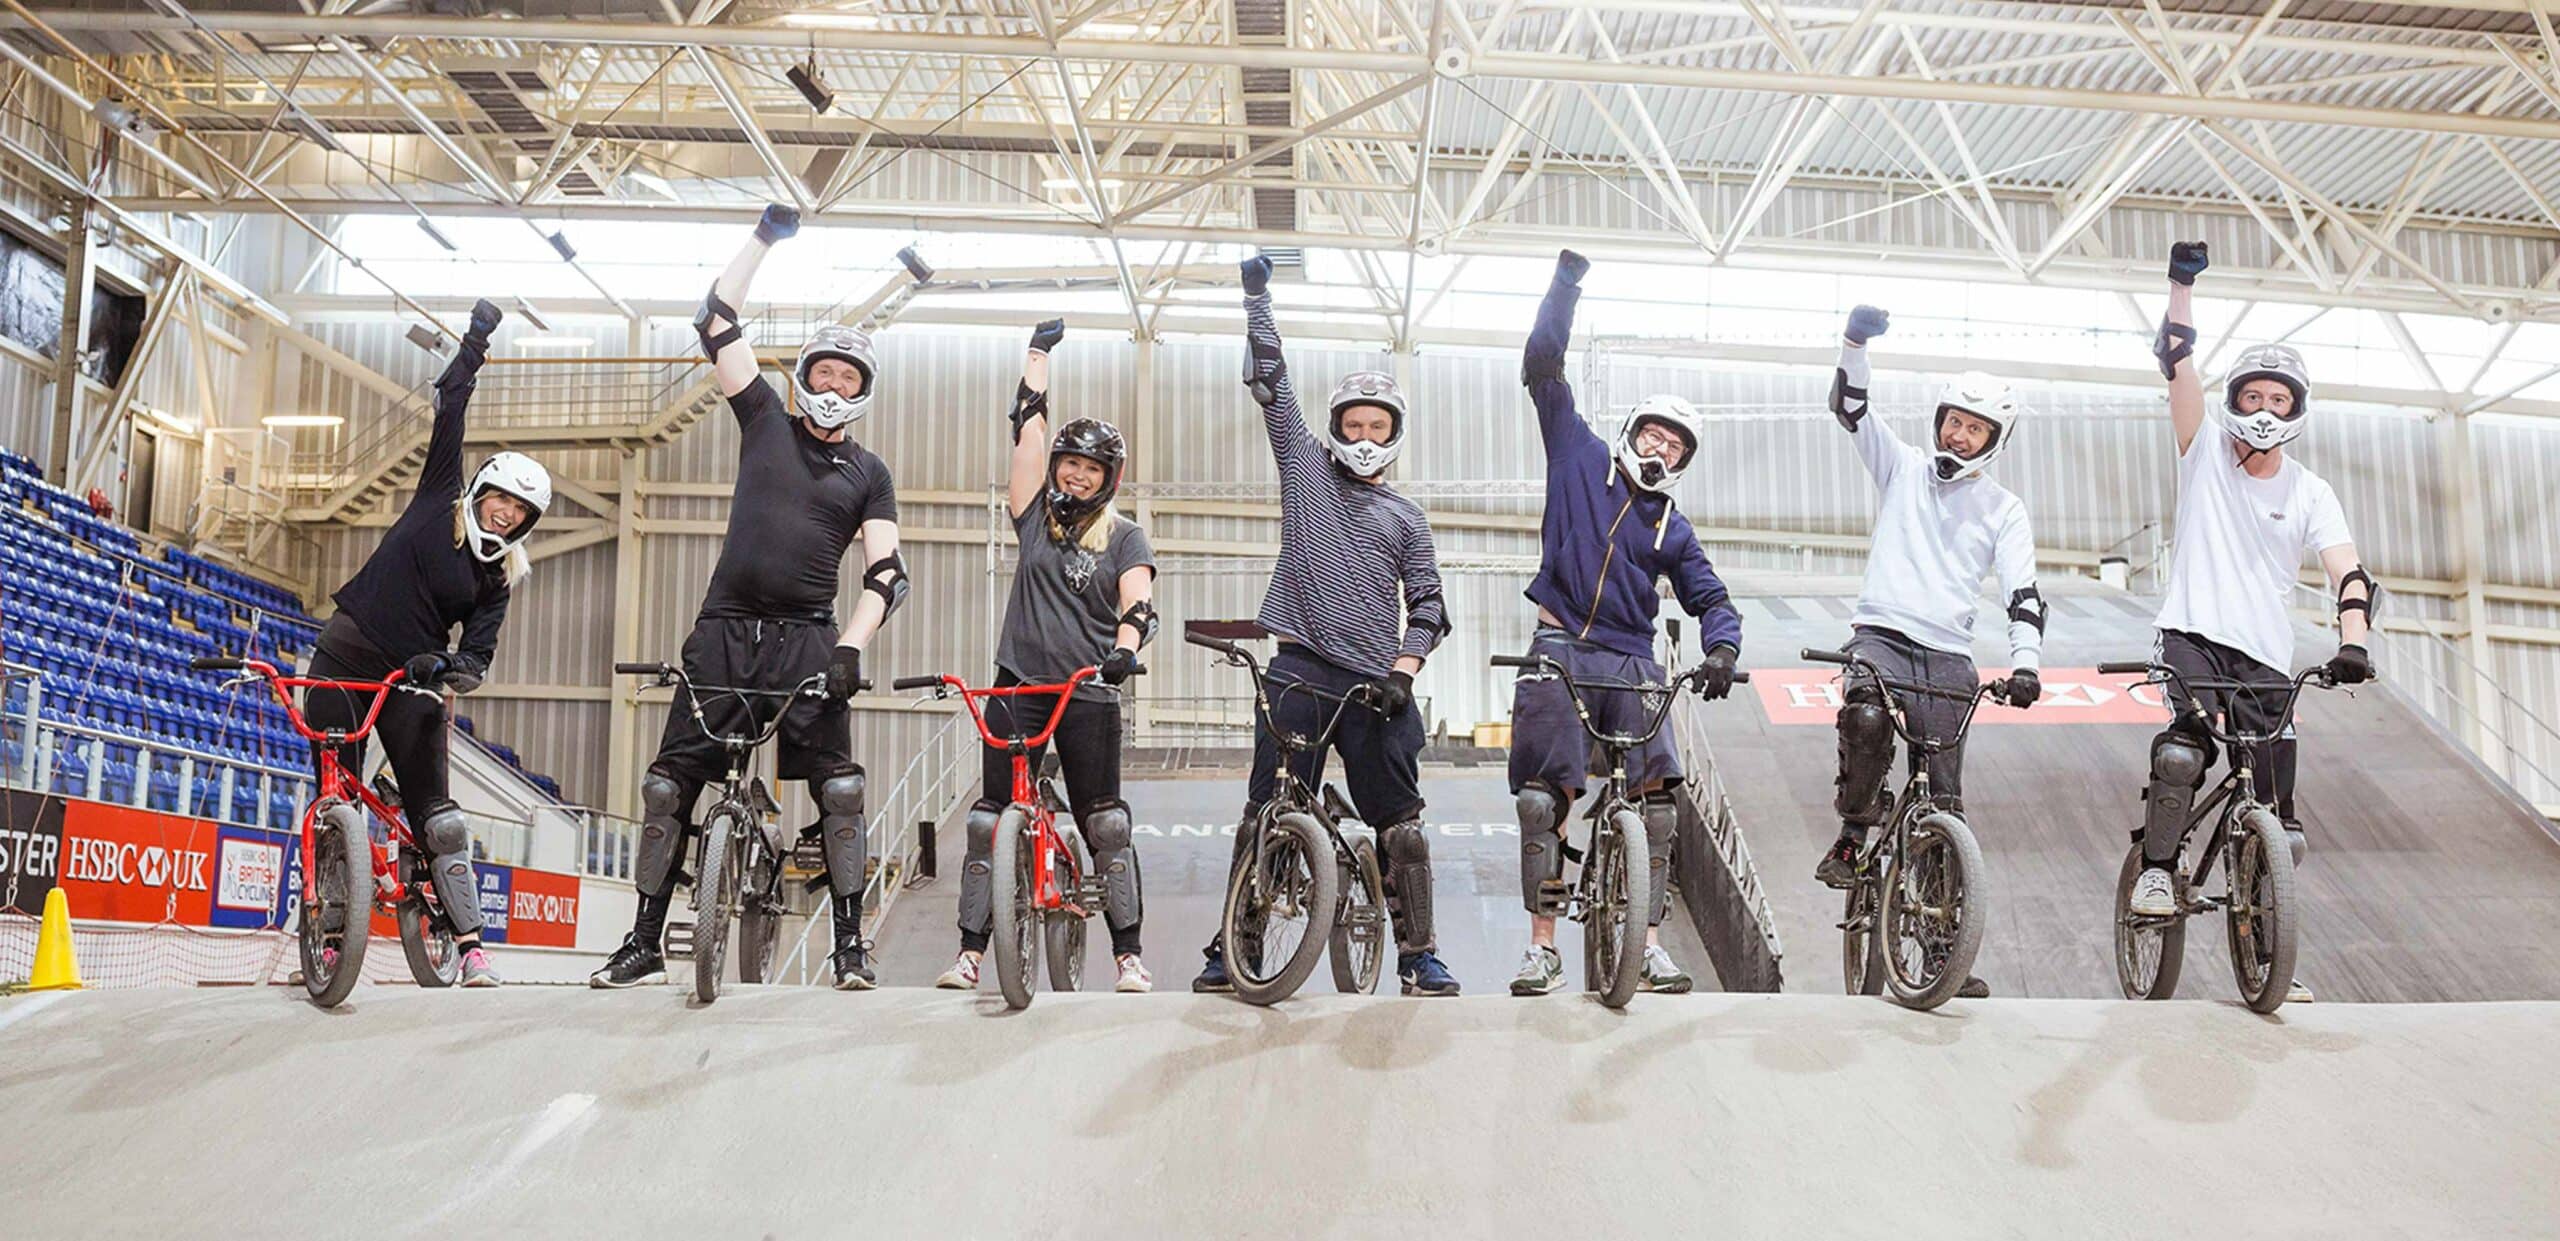 Group of People Riding BMX Bikes At The National Cycling Centre